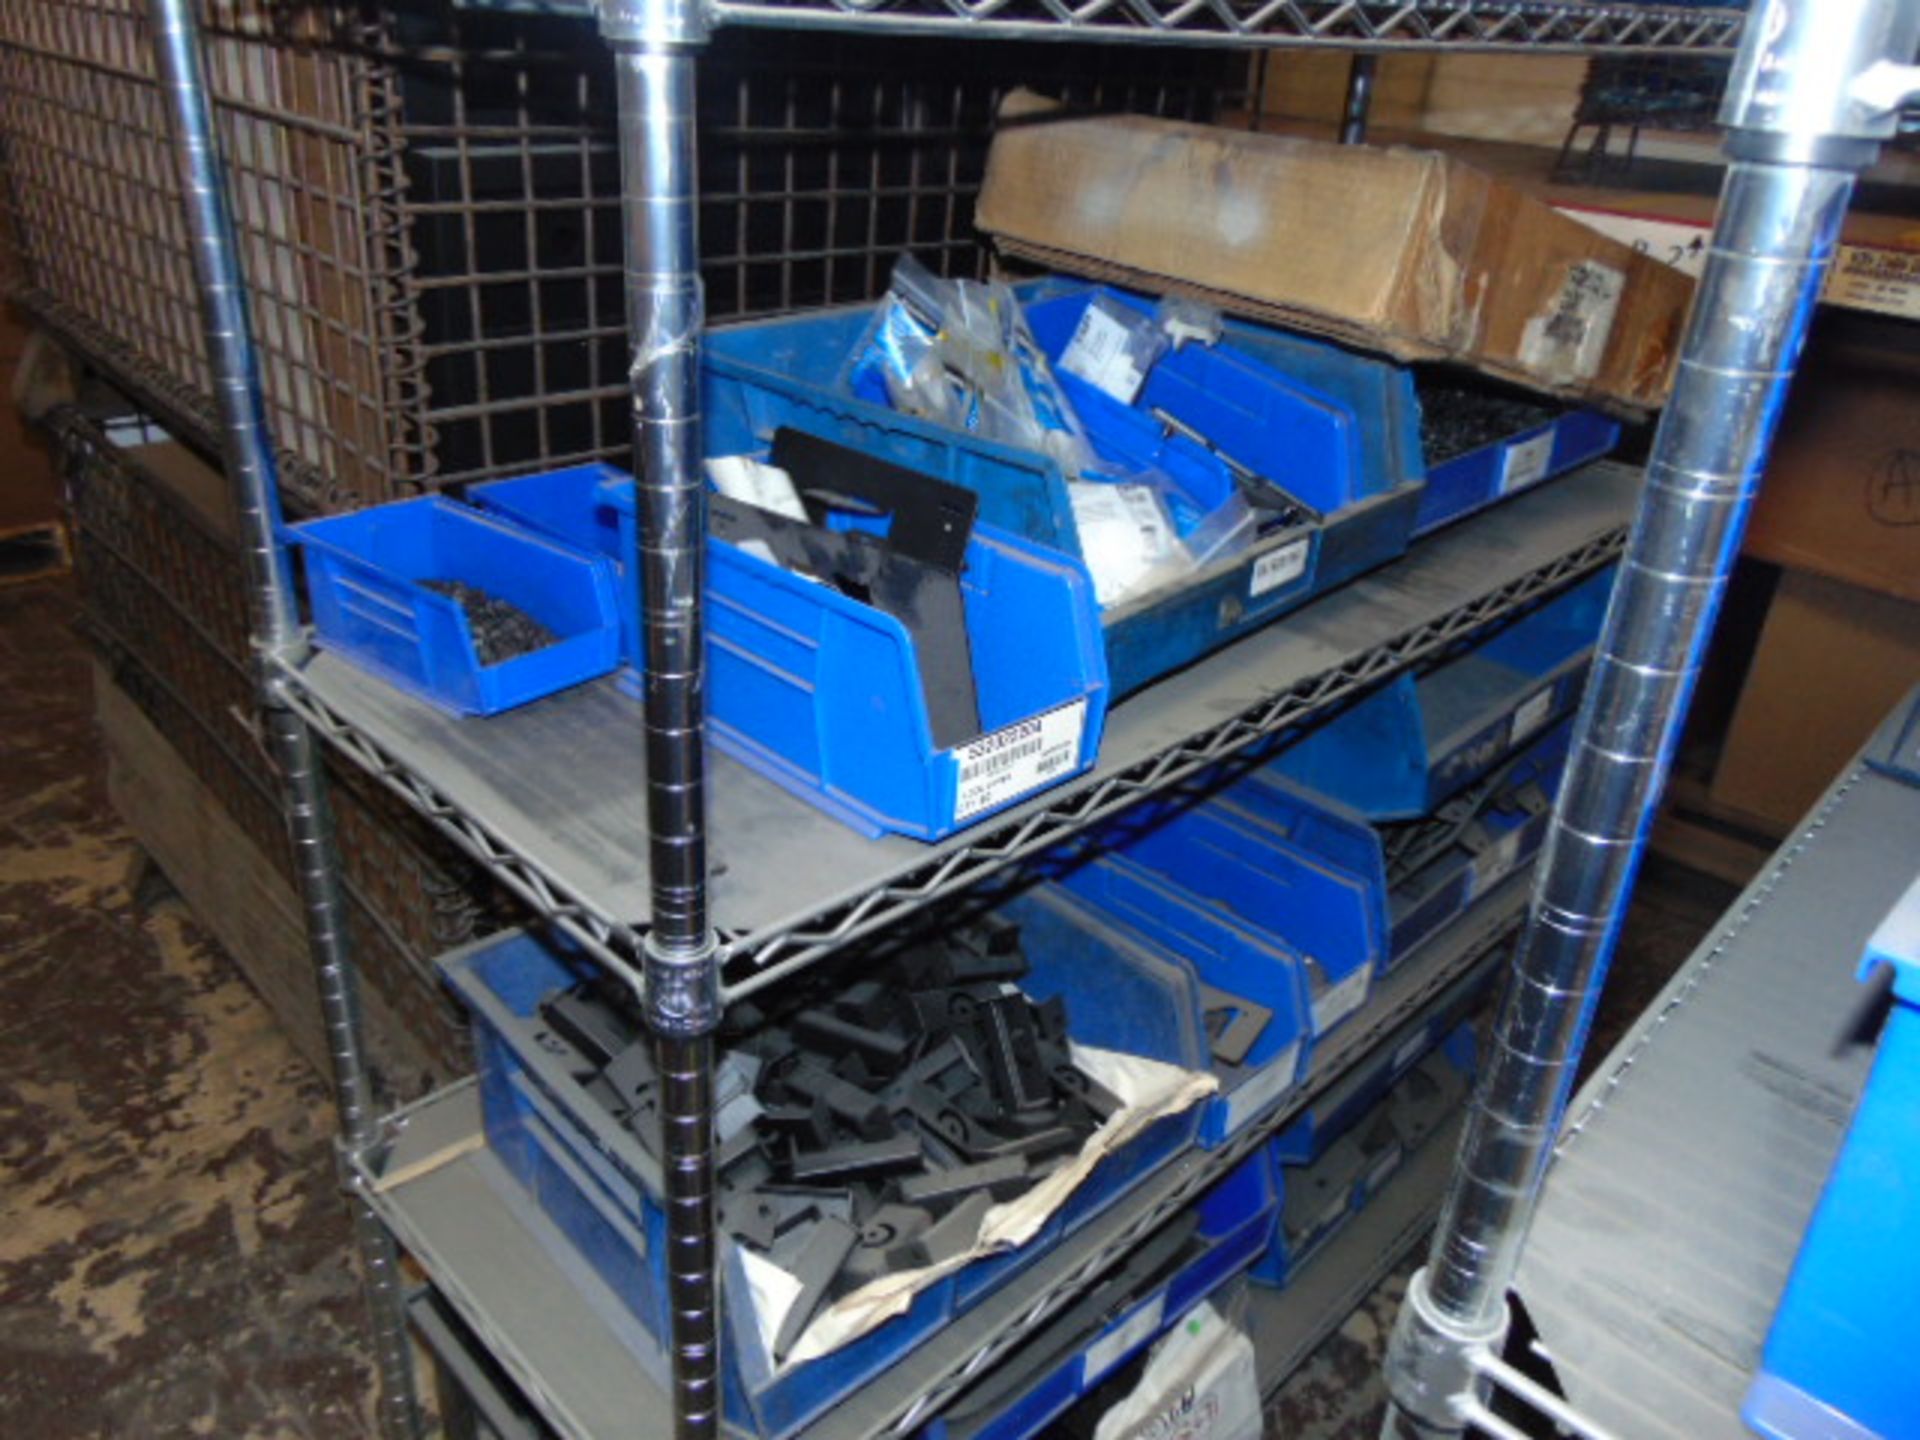 LOT CONSISTING OF: assorted springs, printer labels, key boxes, assorted steel parts, box frames, - Image 16 of 31